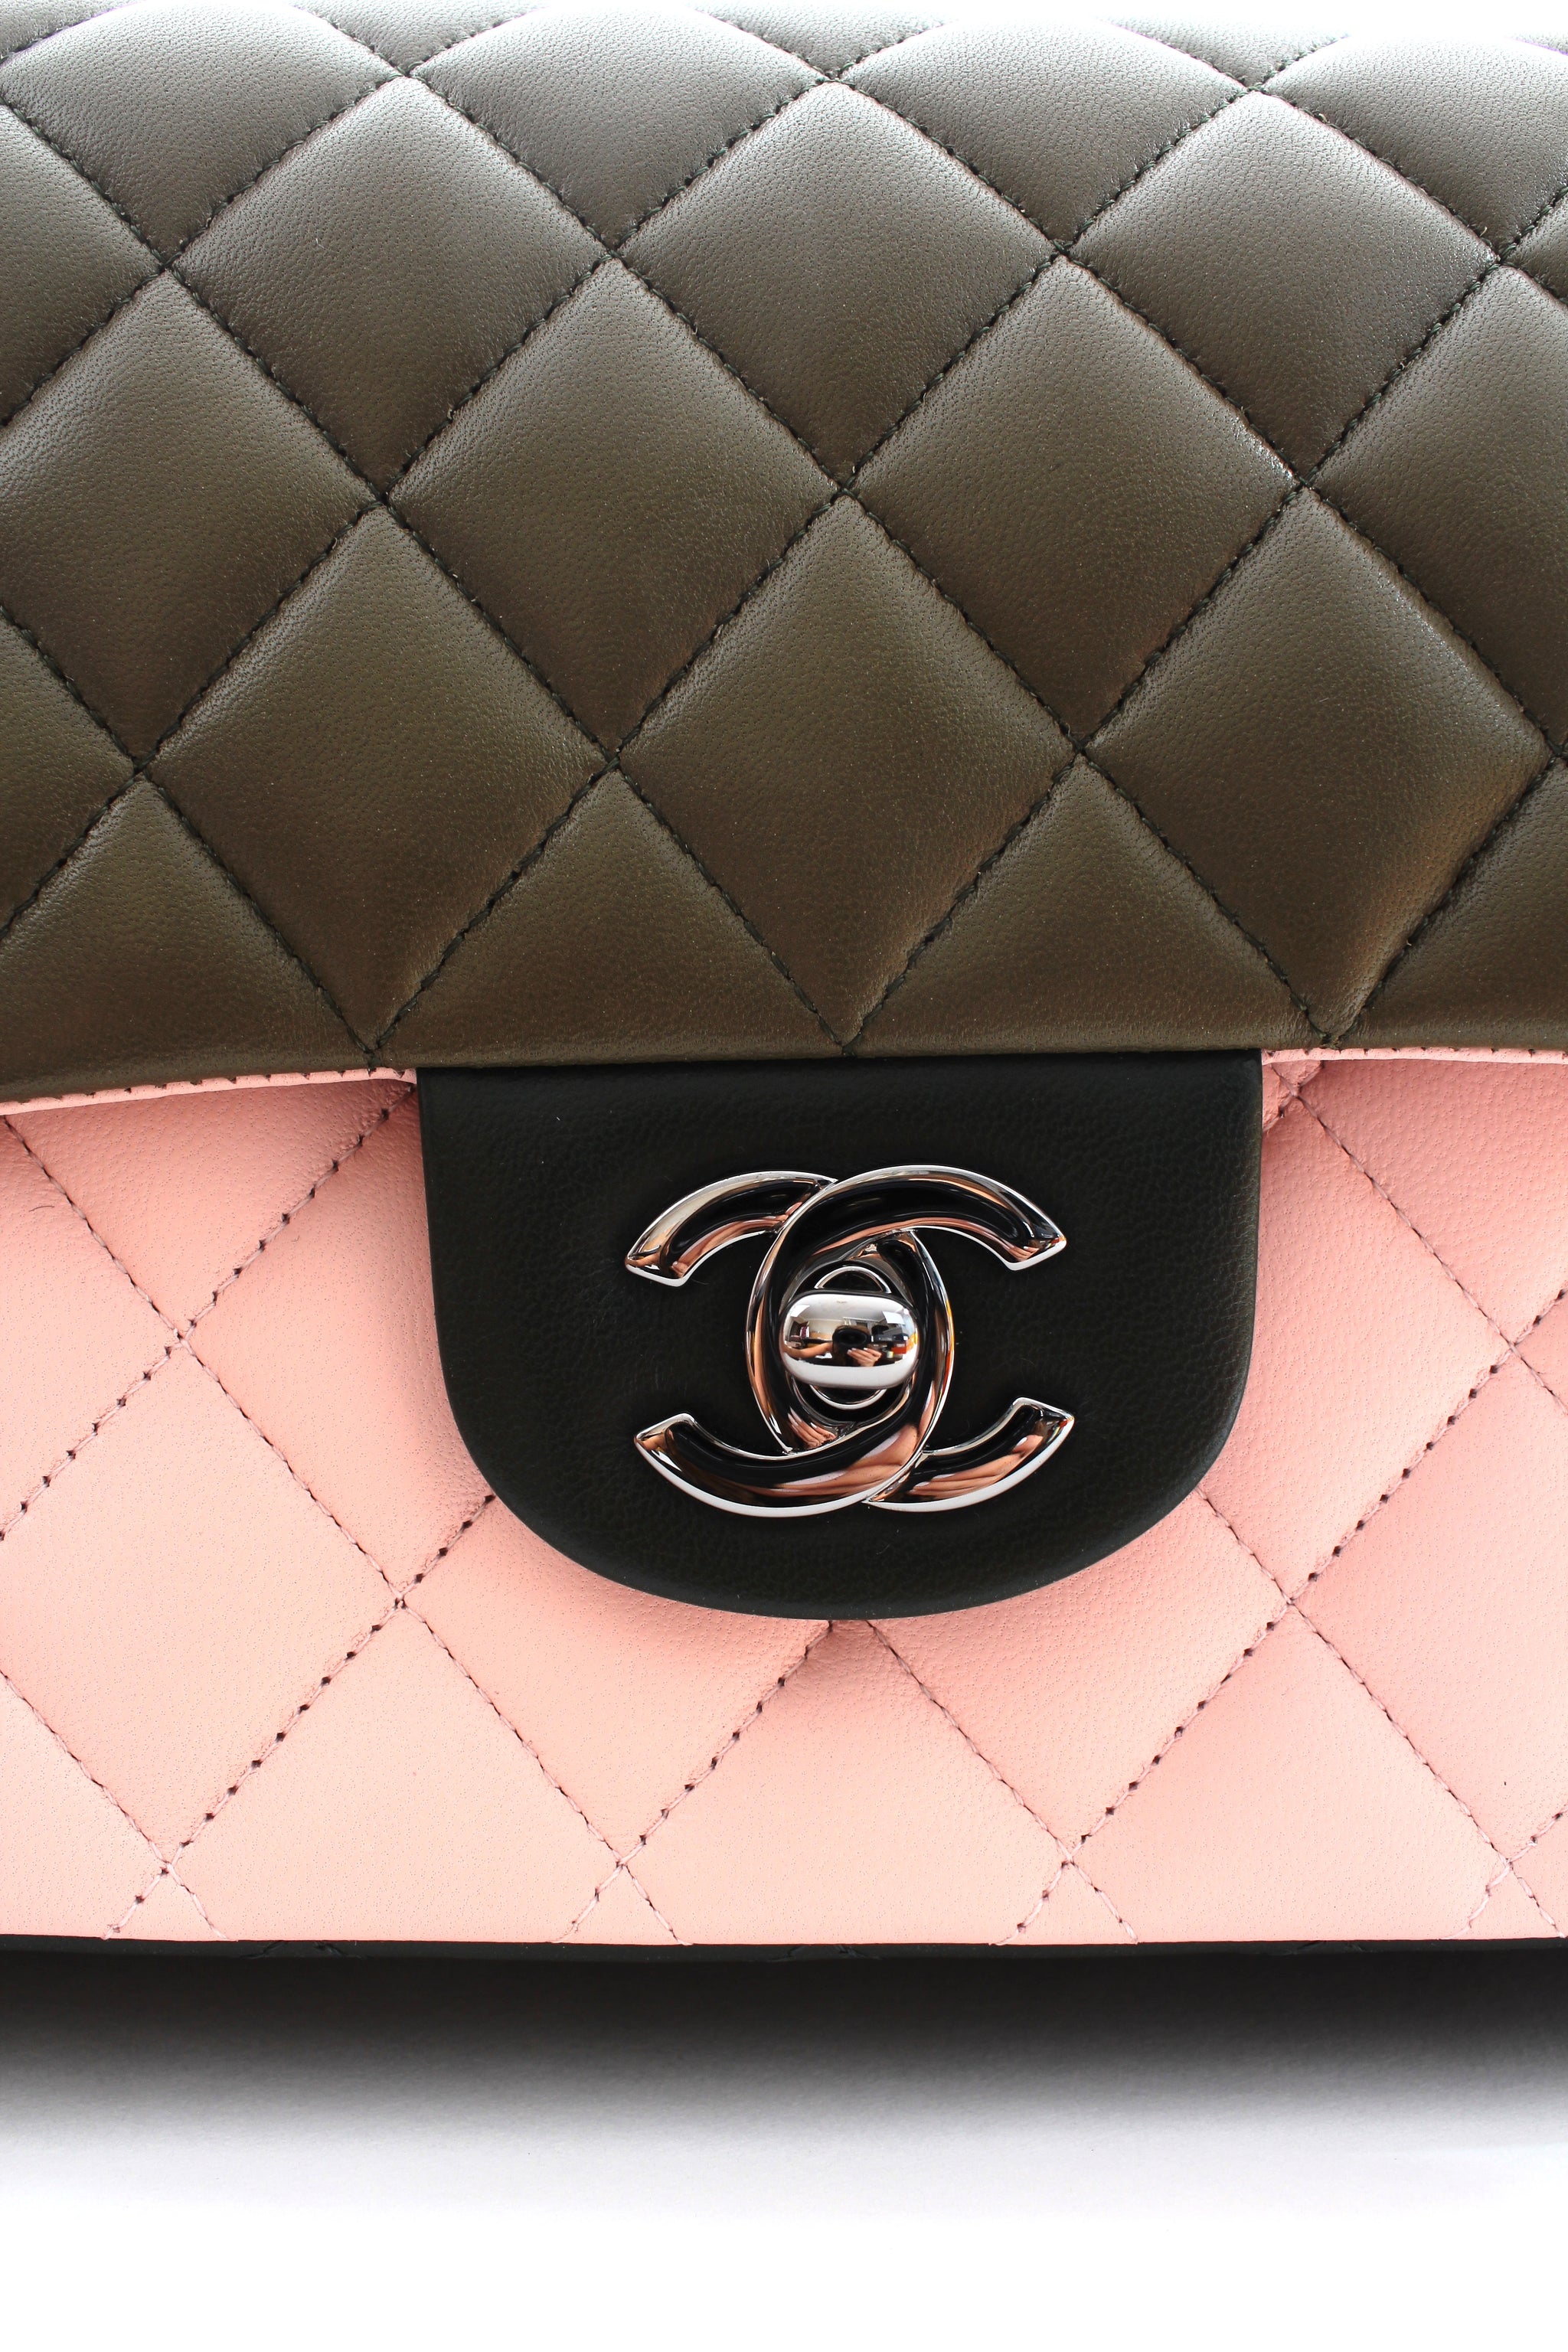 Chanel Limited 50th Anniversary Edition Black Reissue 2.55 Quilted Classic  Calfskin Leather 226 Flap Bag - Yoogi's Closet